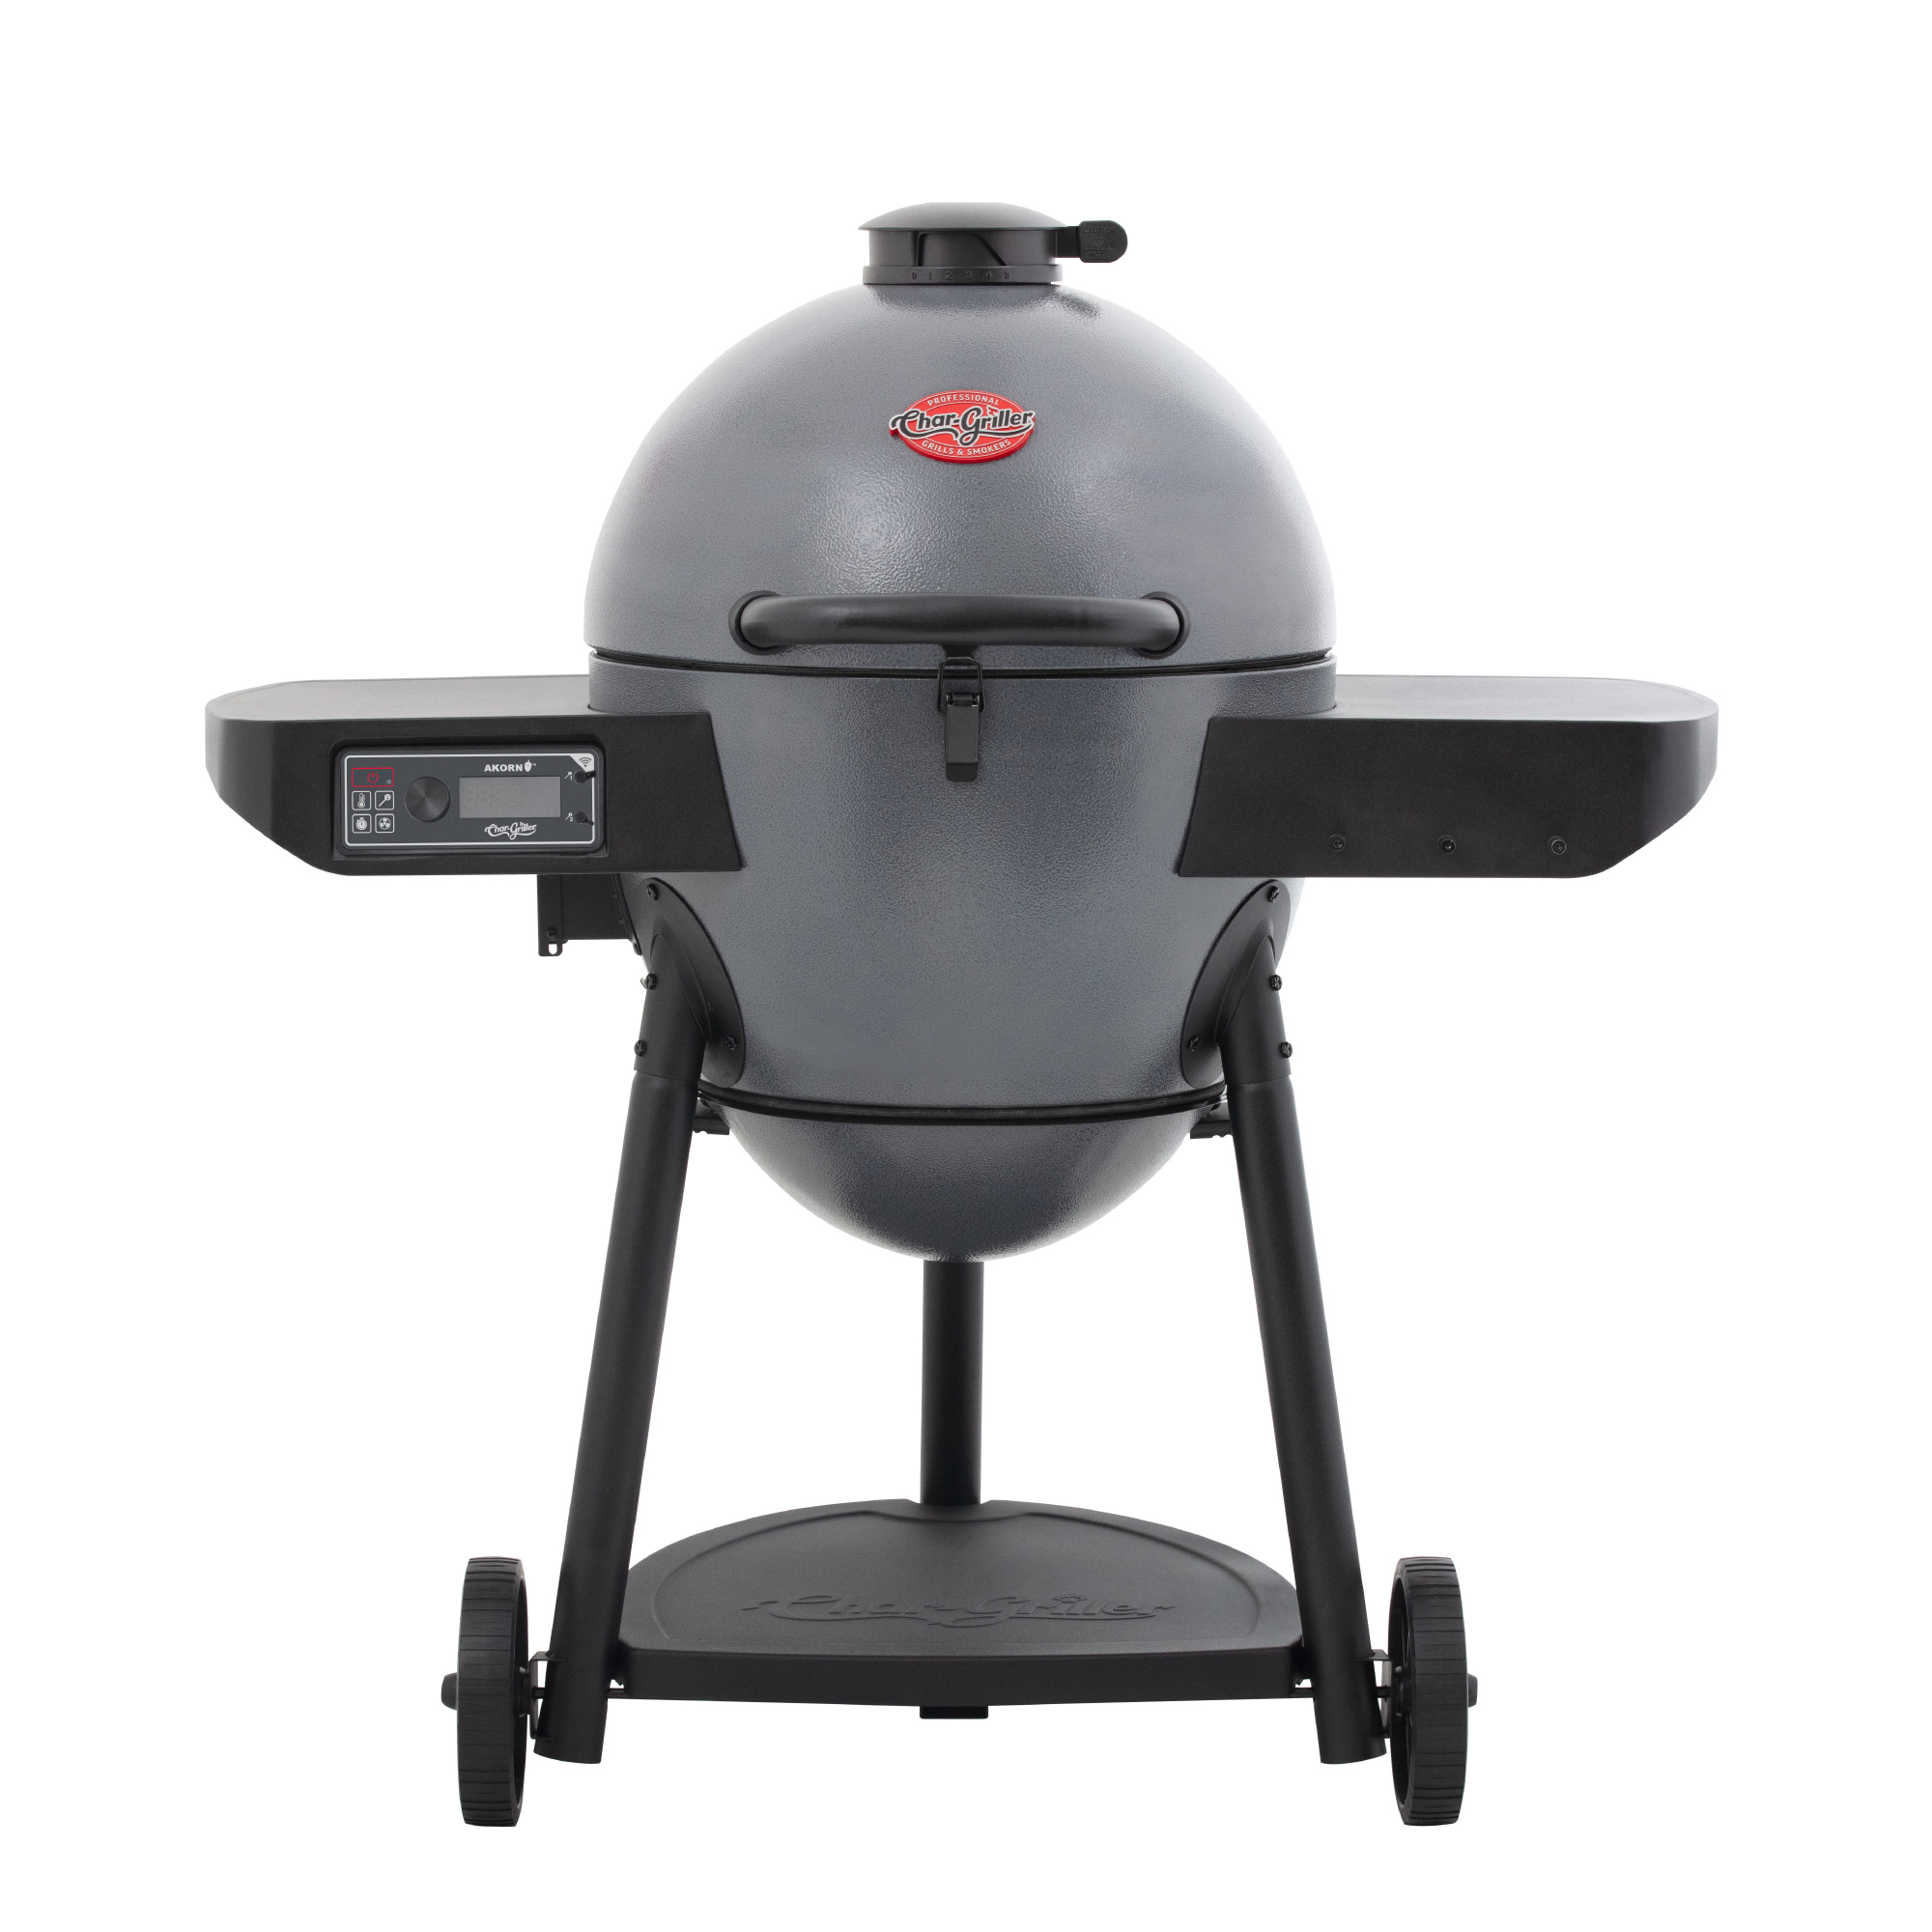 Auto Kamado Charcoal Grill in Gray - image 1 of 15